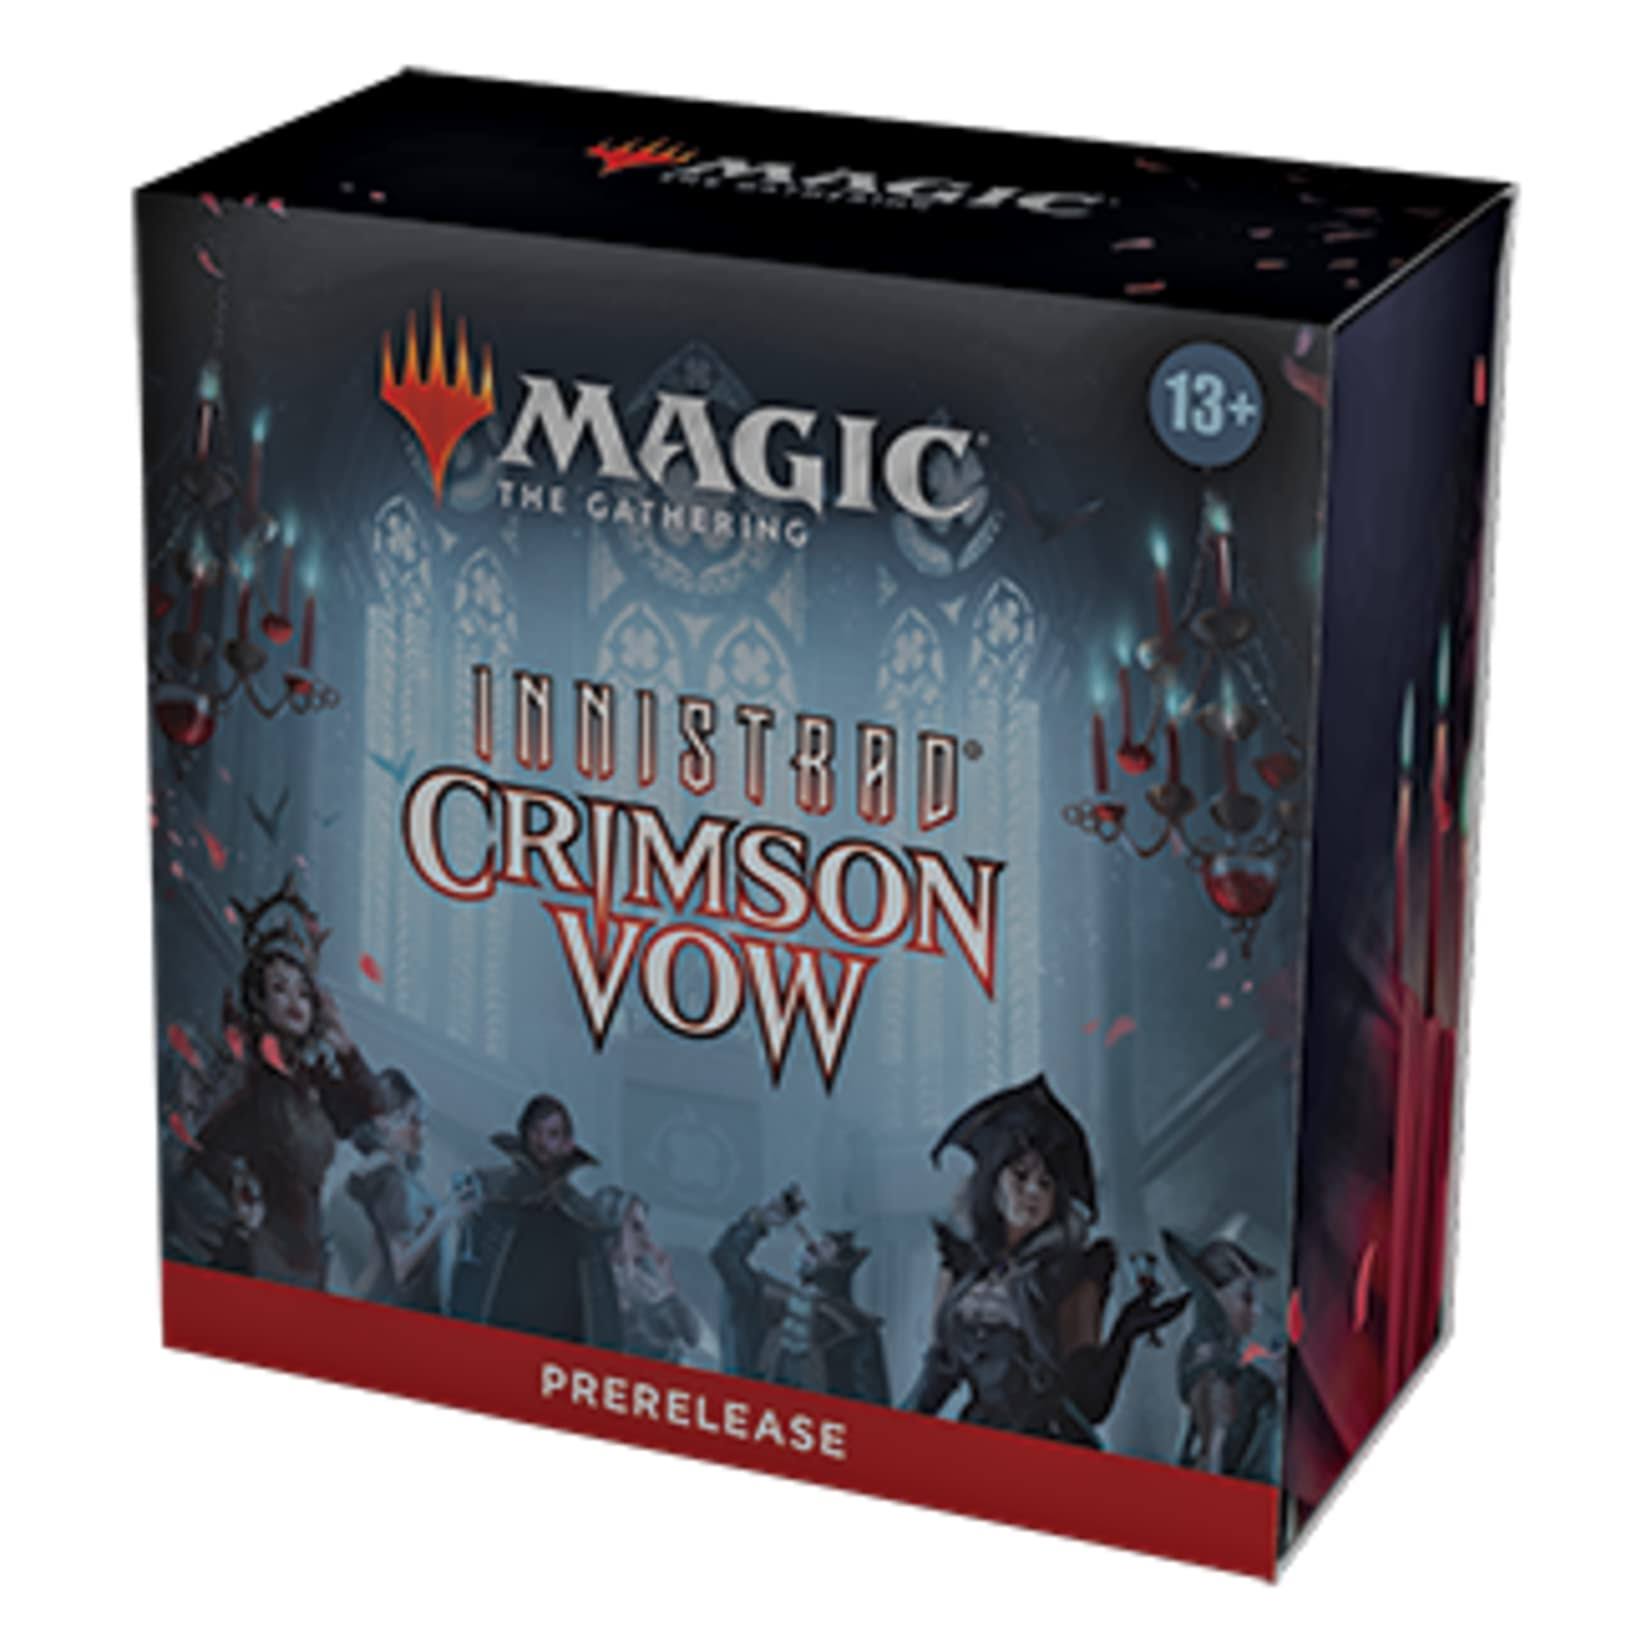 Magic The Gathering: Prerelease Pack - Innistrad Crimson Vow